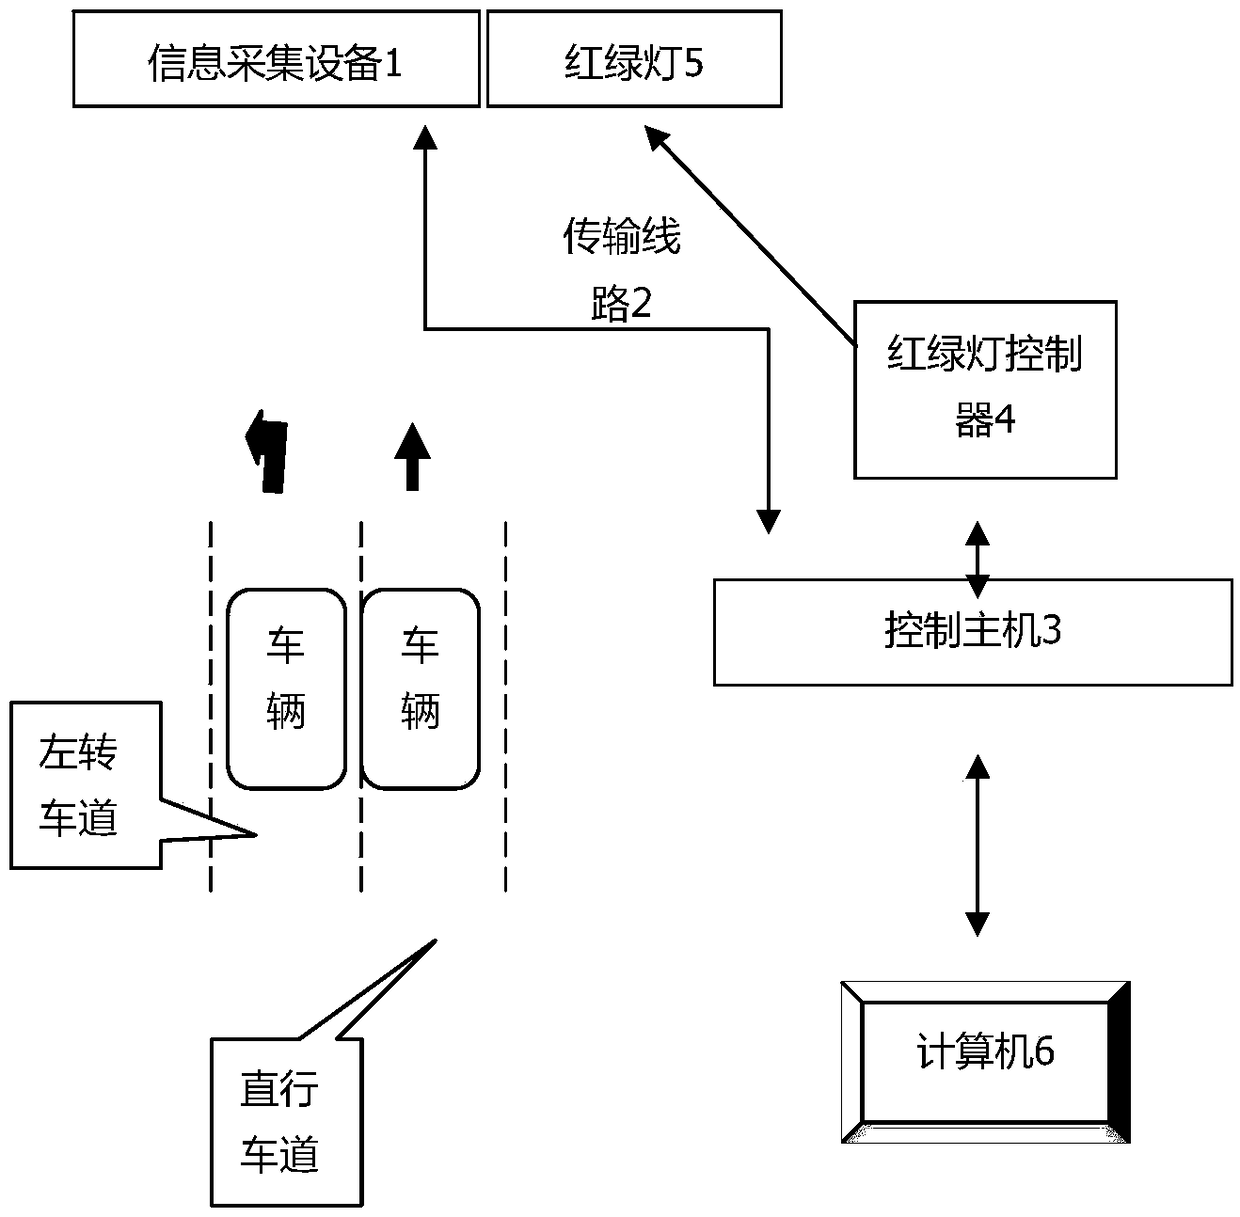 Traffic light optimization scheduling method and system